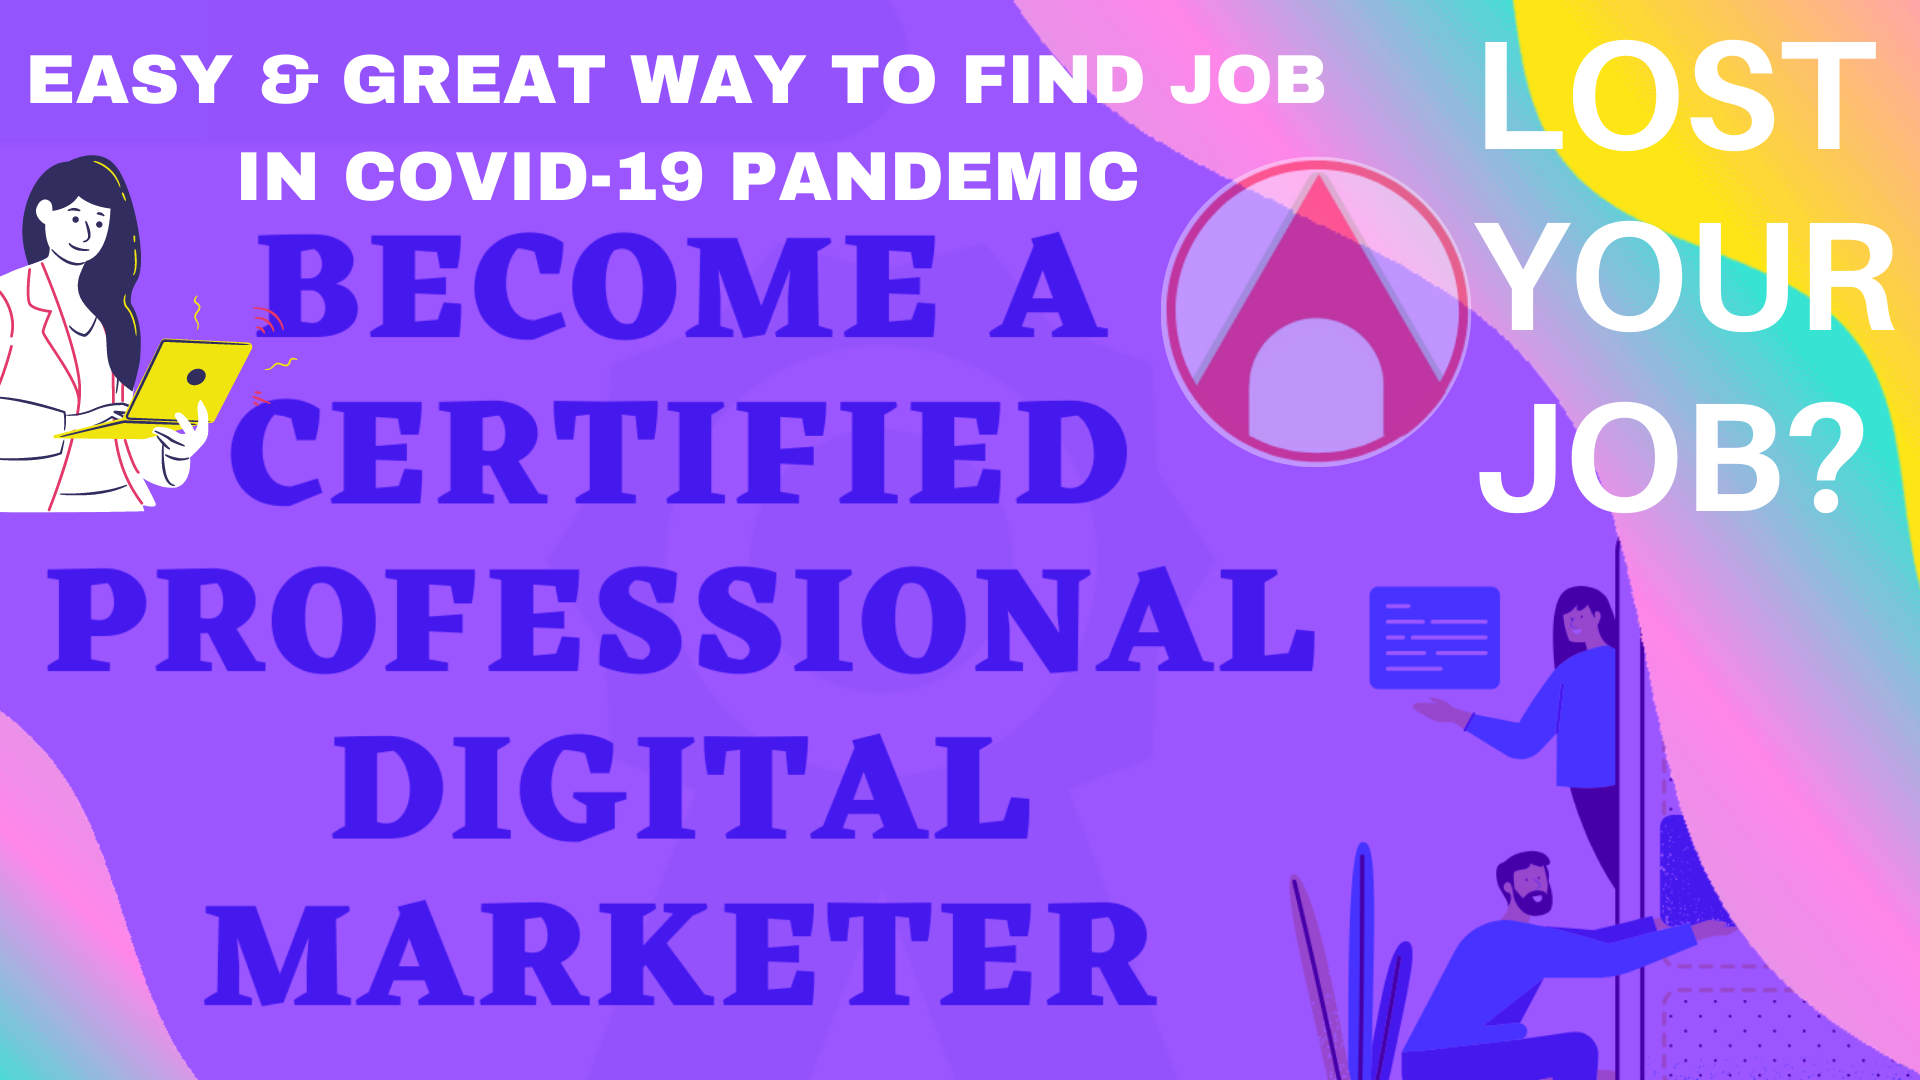 easy-great-way-to-find-jobs-in-covid-19-pandemic-job-opportunities